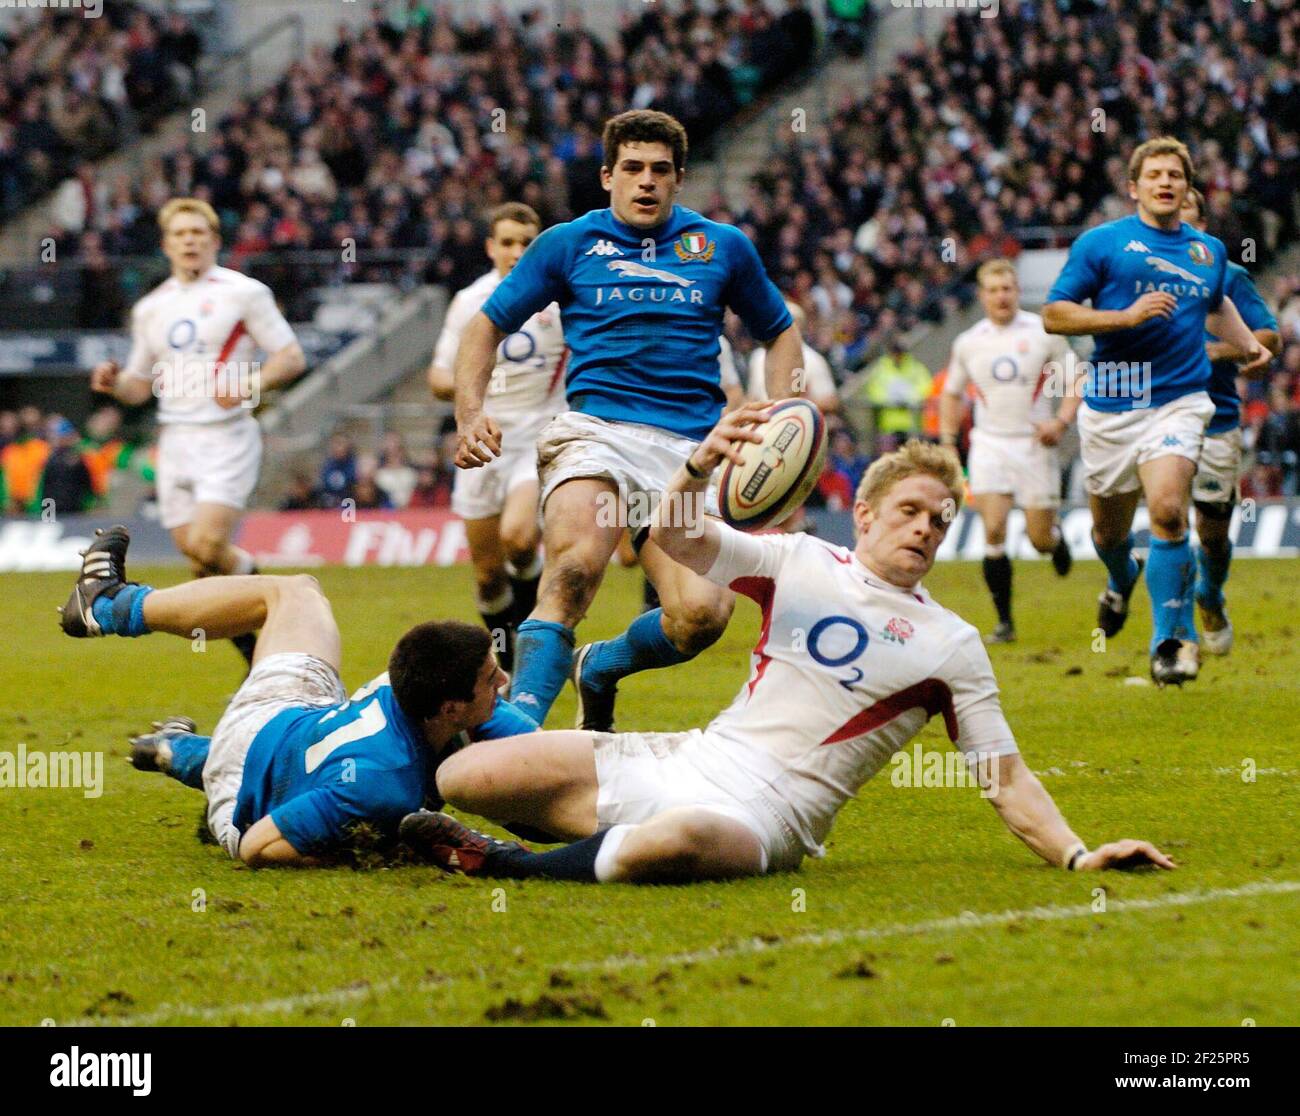 SIX NATIONS ENGLAND V ITALY IAIN BALSHAW ABOUT TO SCORE HIS TRY 12/3/3005  PICTURE DAVID ASHDOWN RUGBY ENGLAND Stock Photo